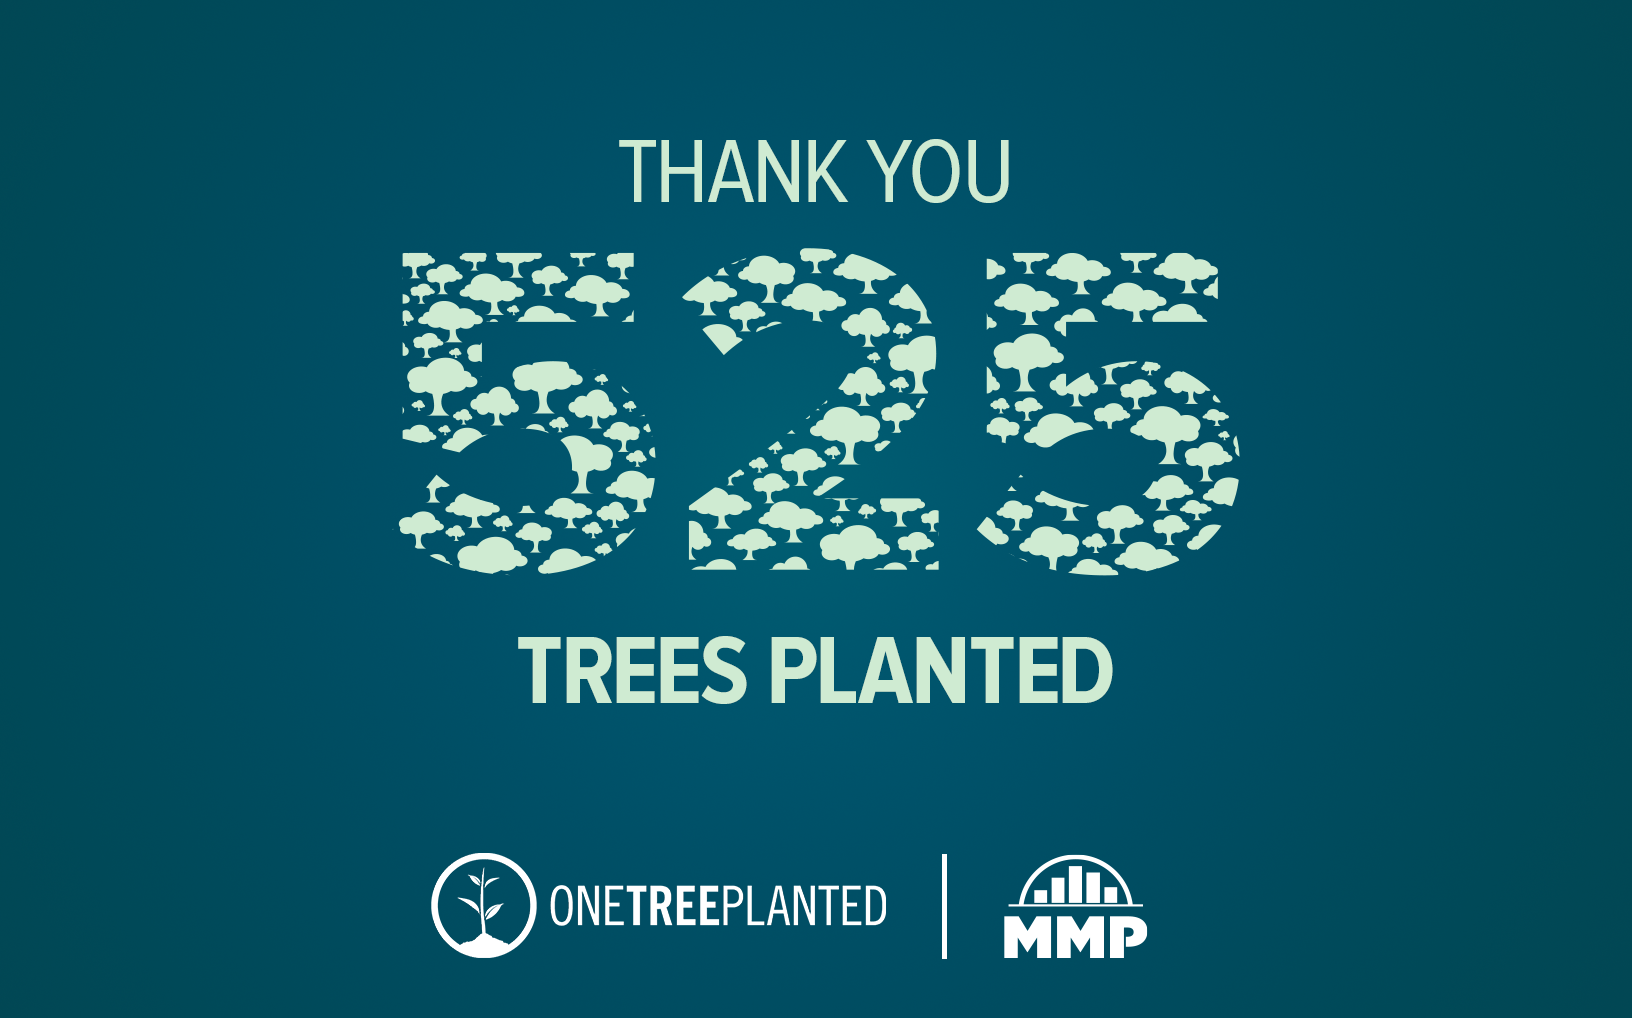 525 Reasons to be Excited about the MMP’s Plant a Tree Campaign